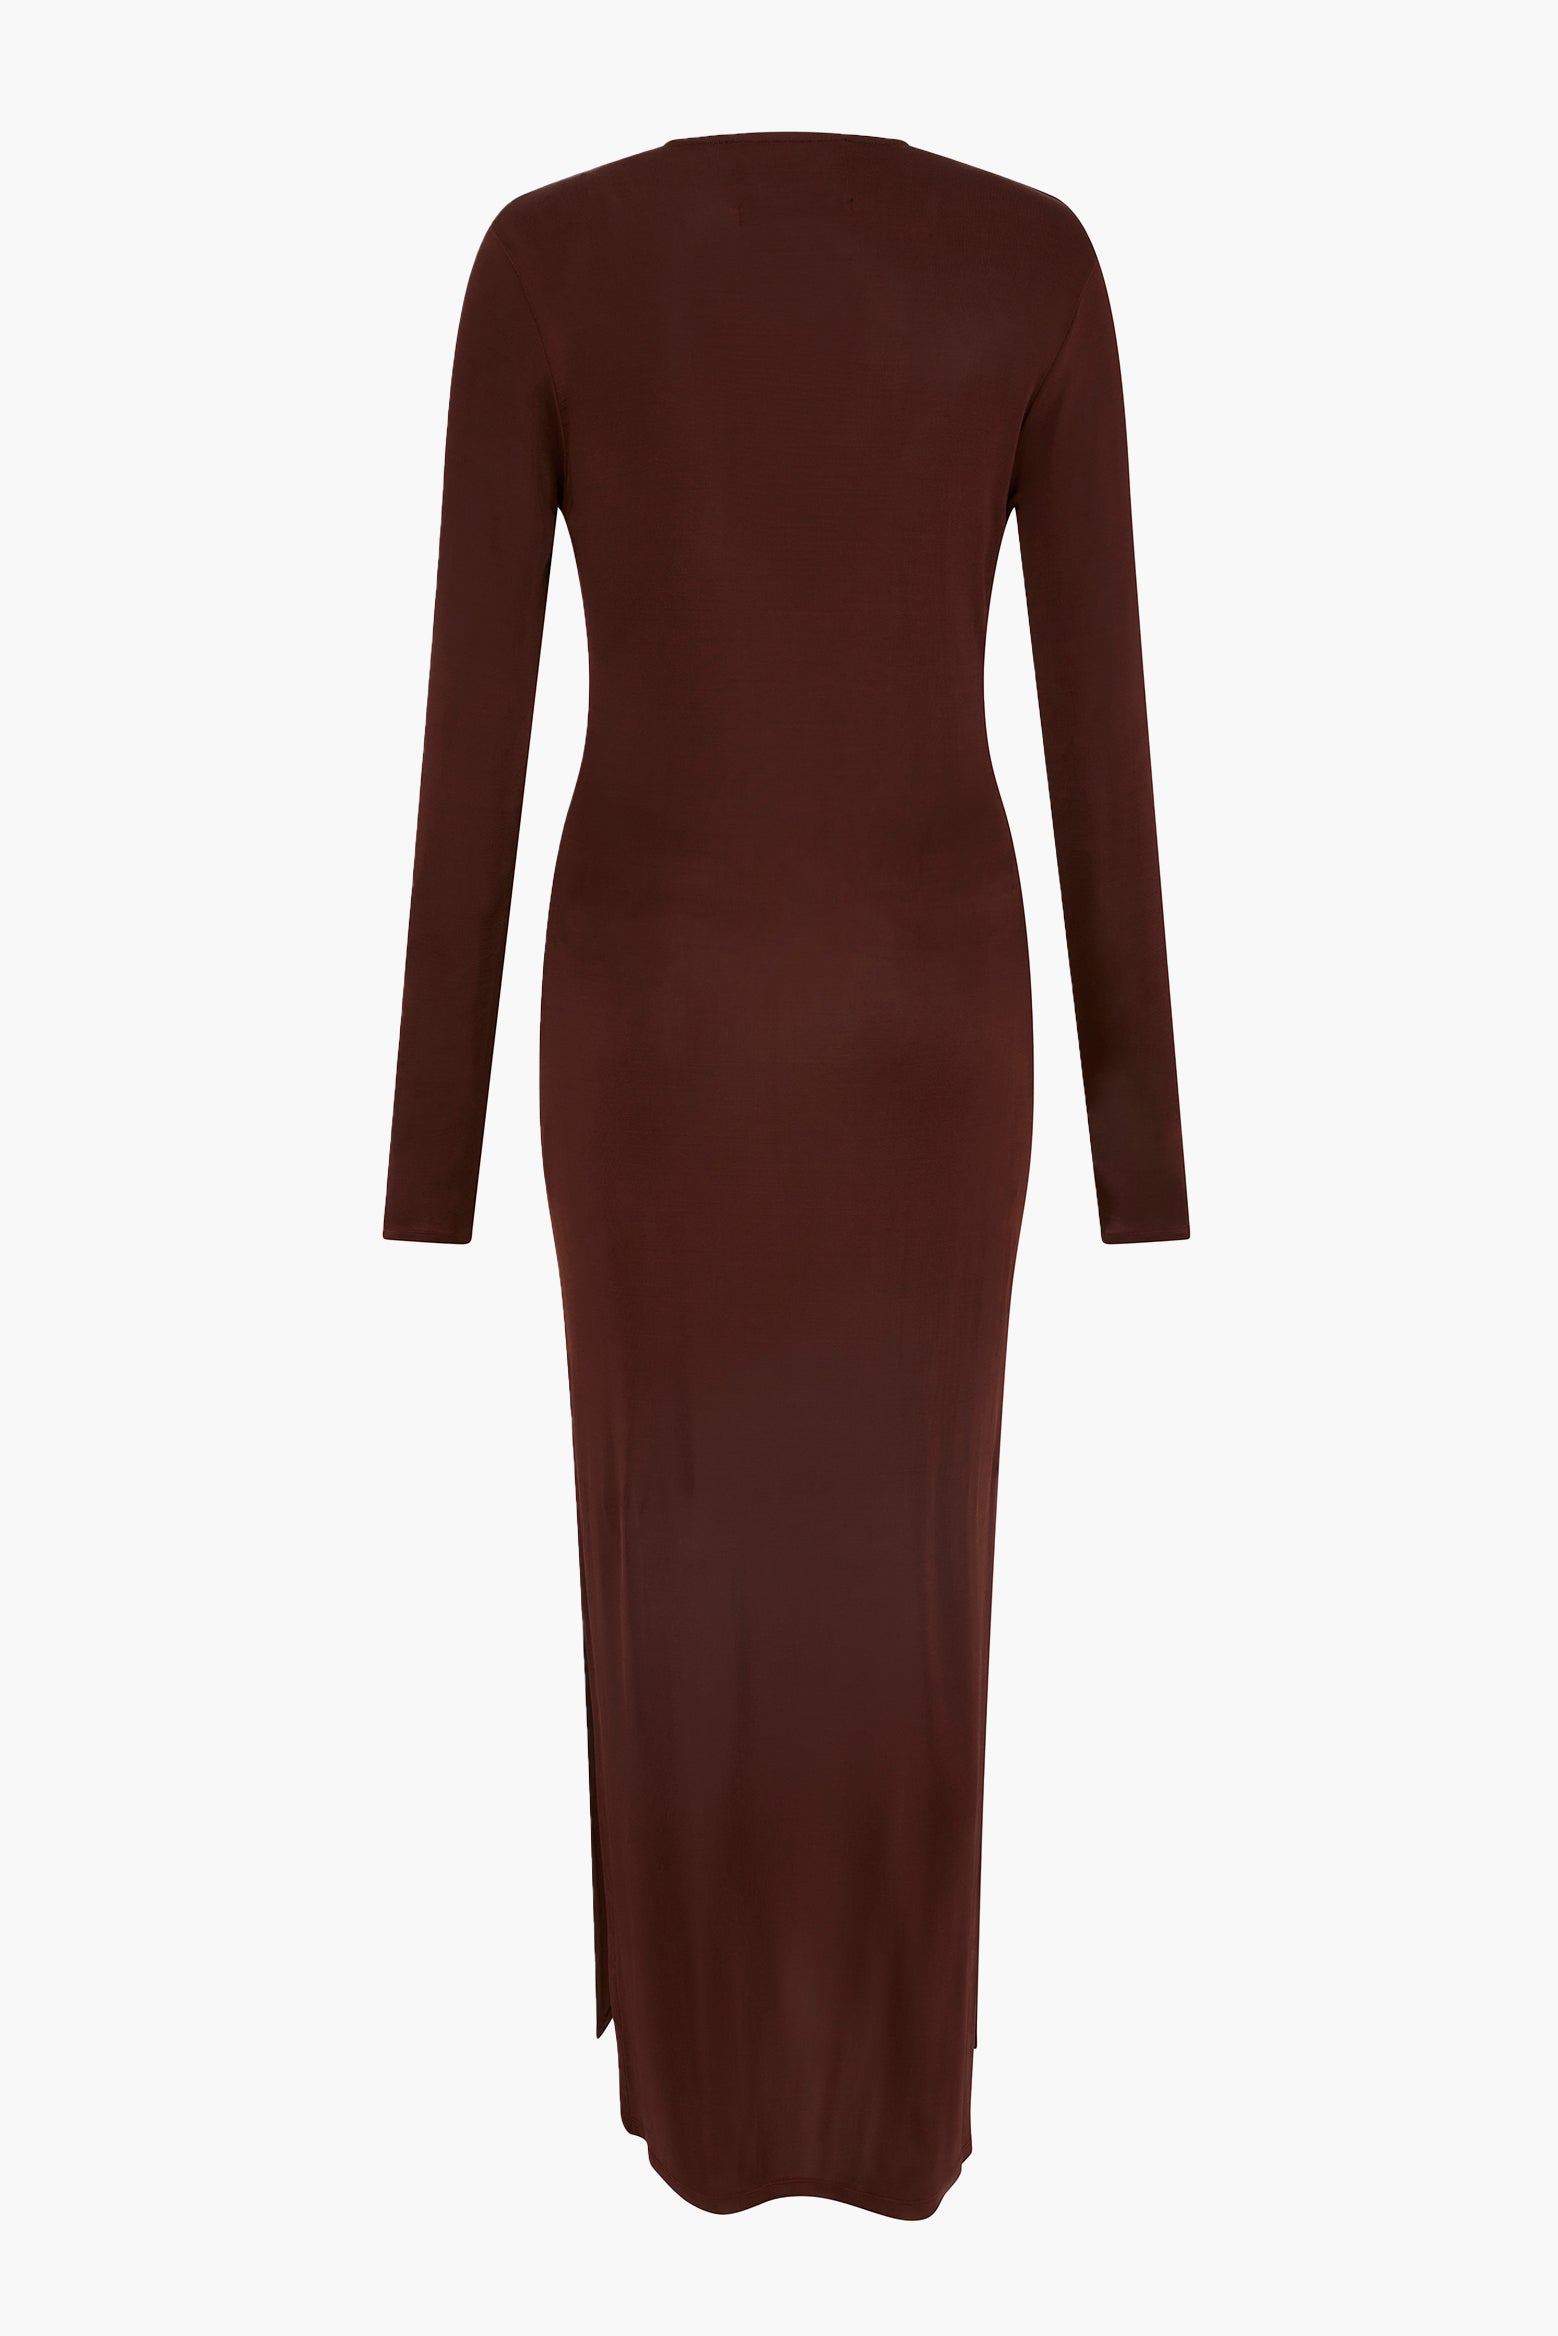 Louisa Ballou Long Hellios Dress in Brown available at The New Trend Australia.